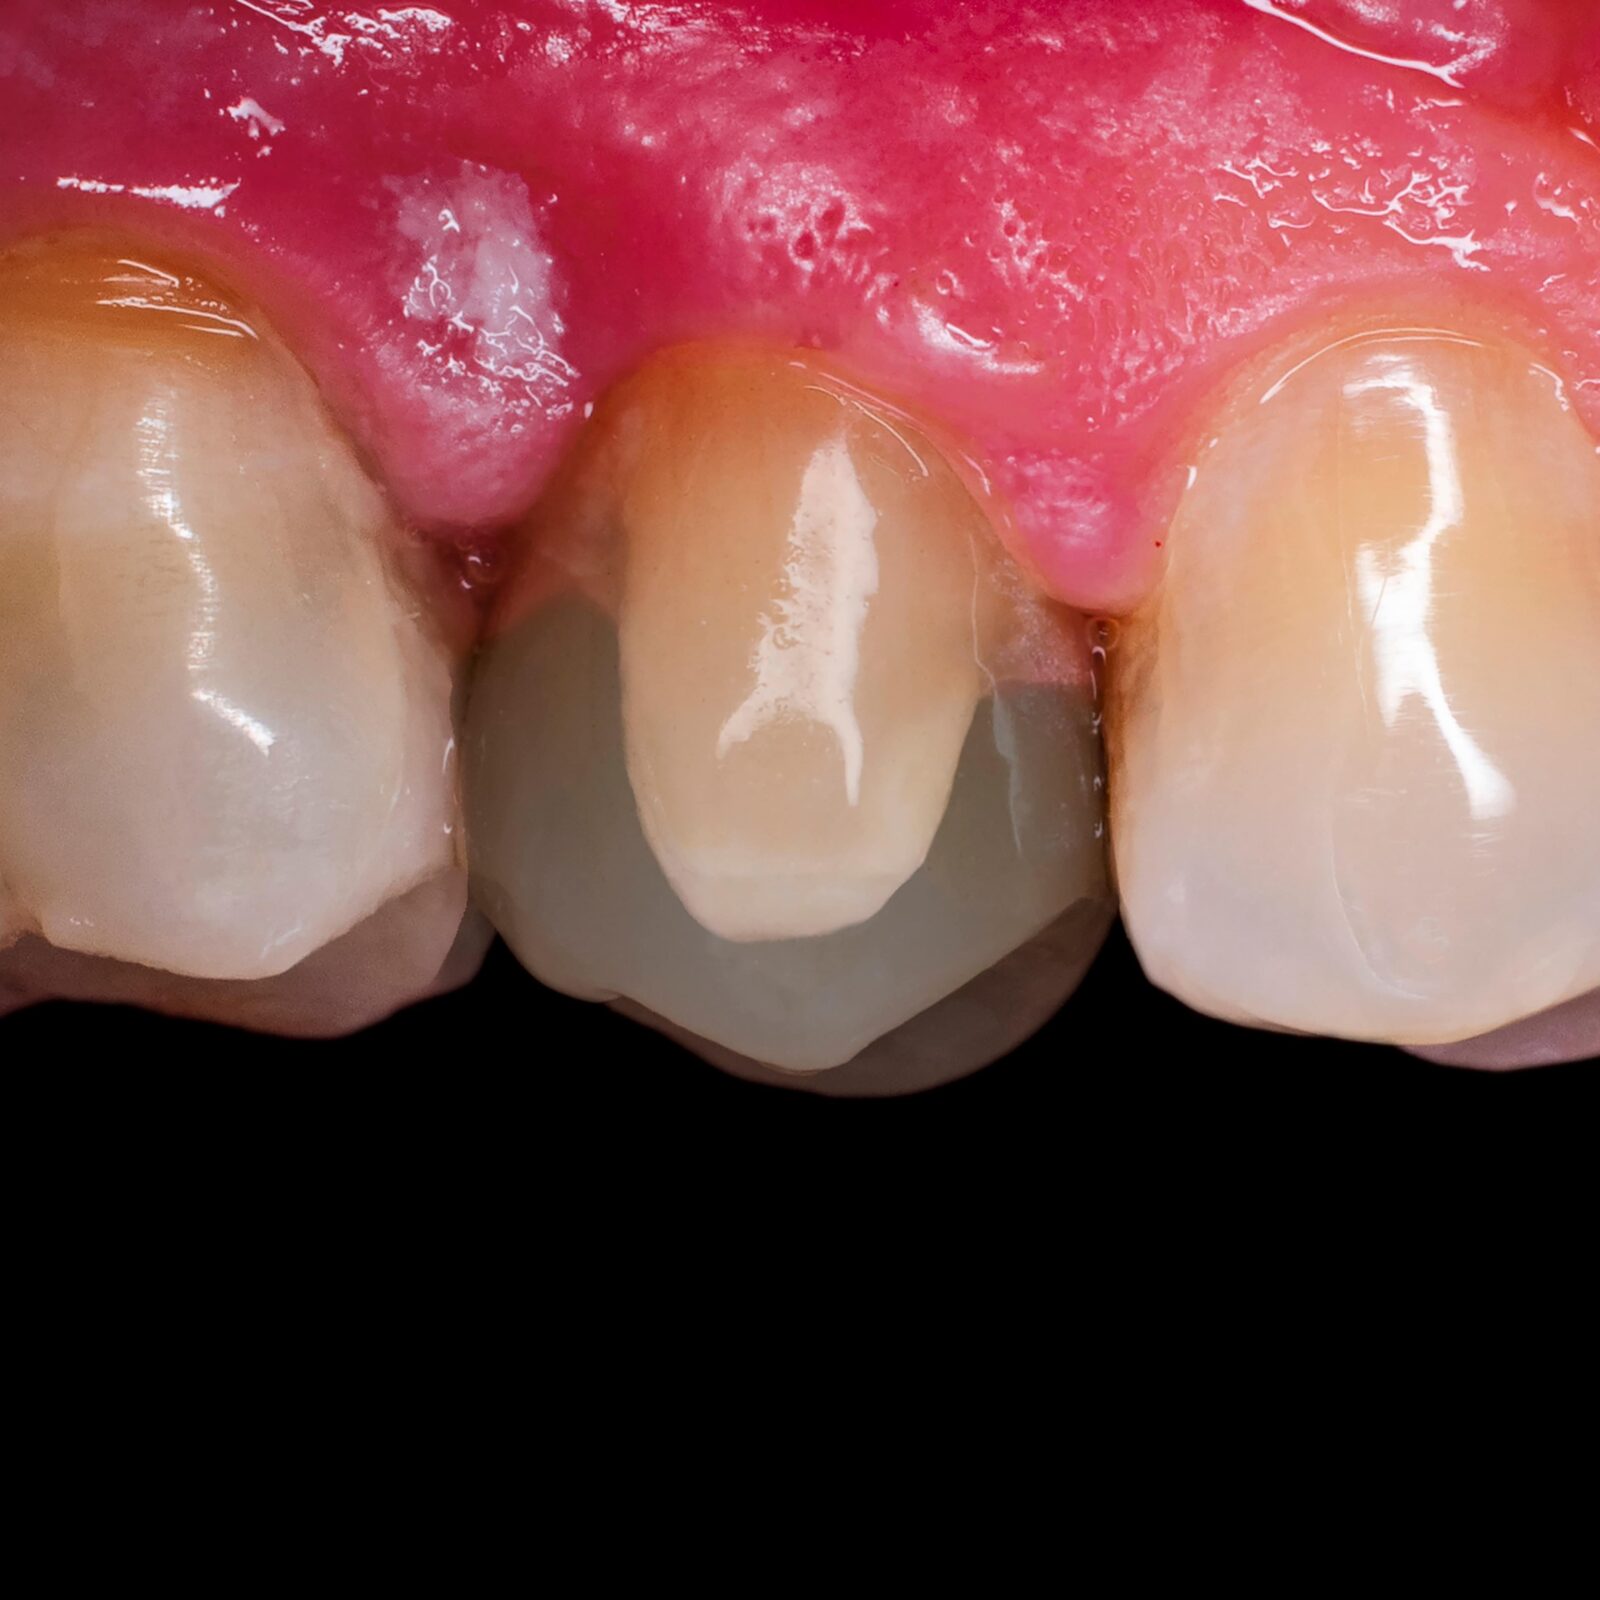 dental restoration showed overlapping a small tooth